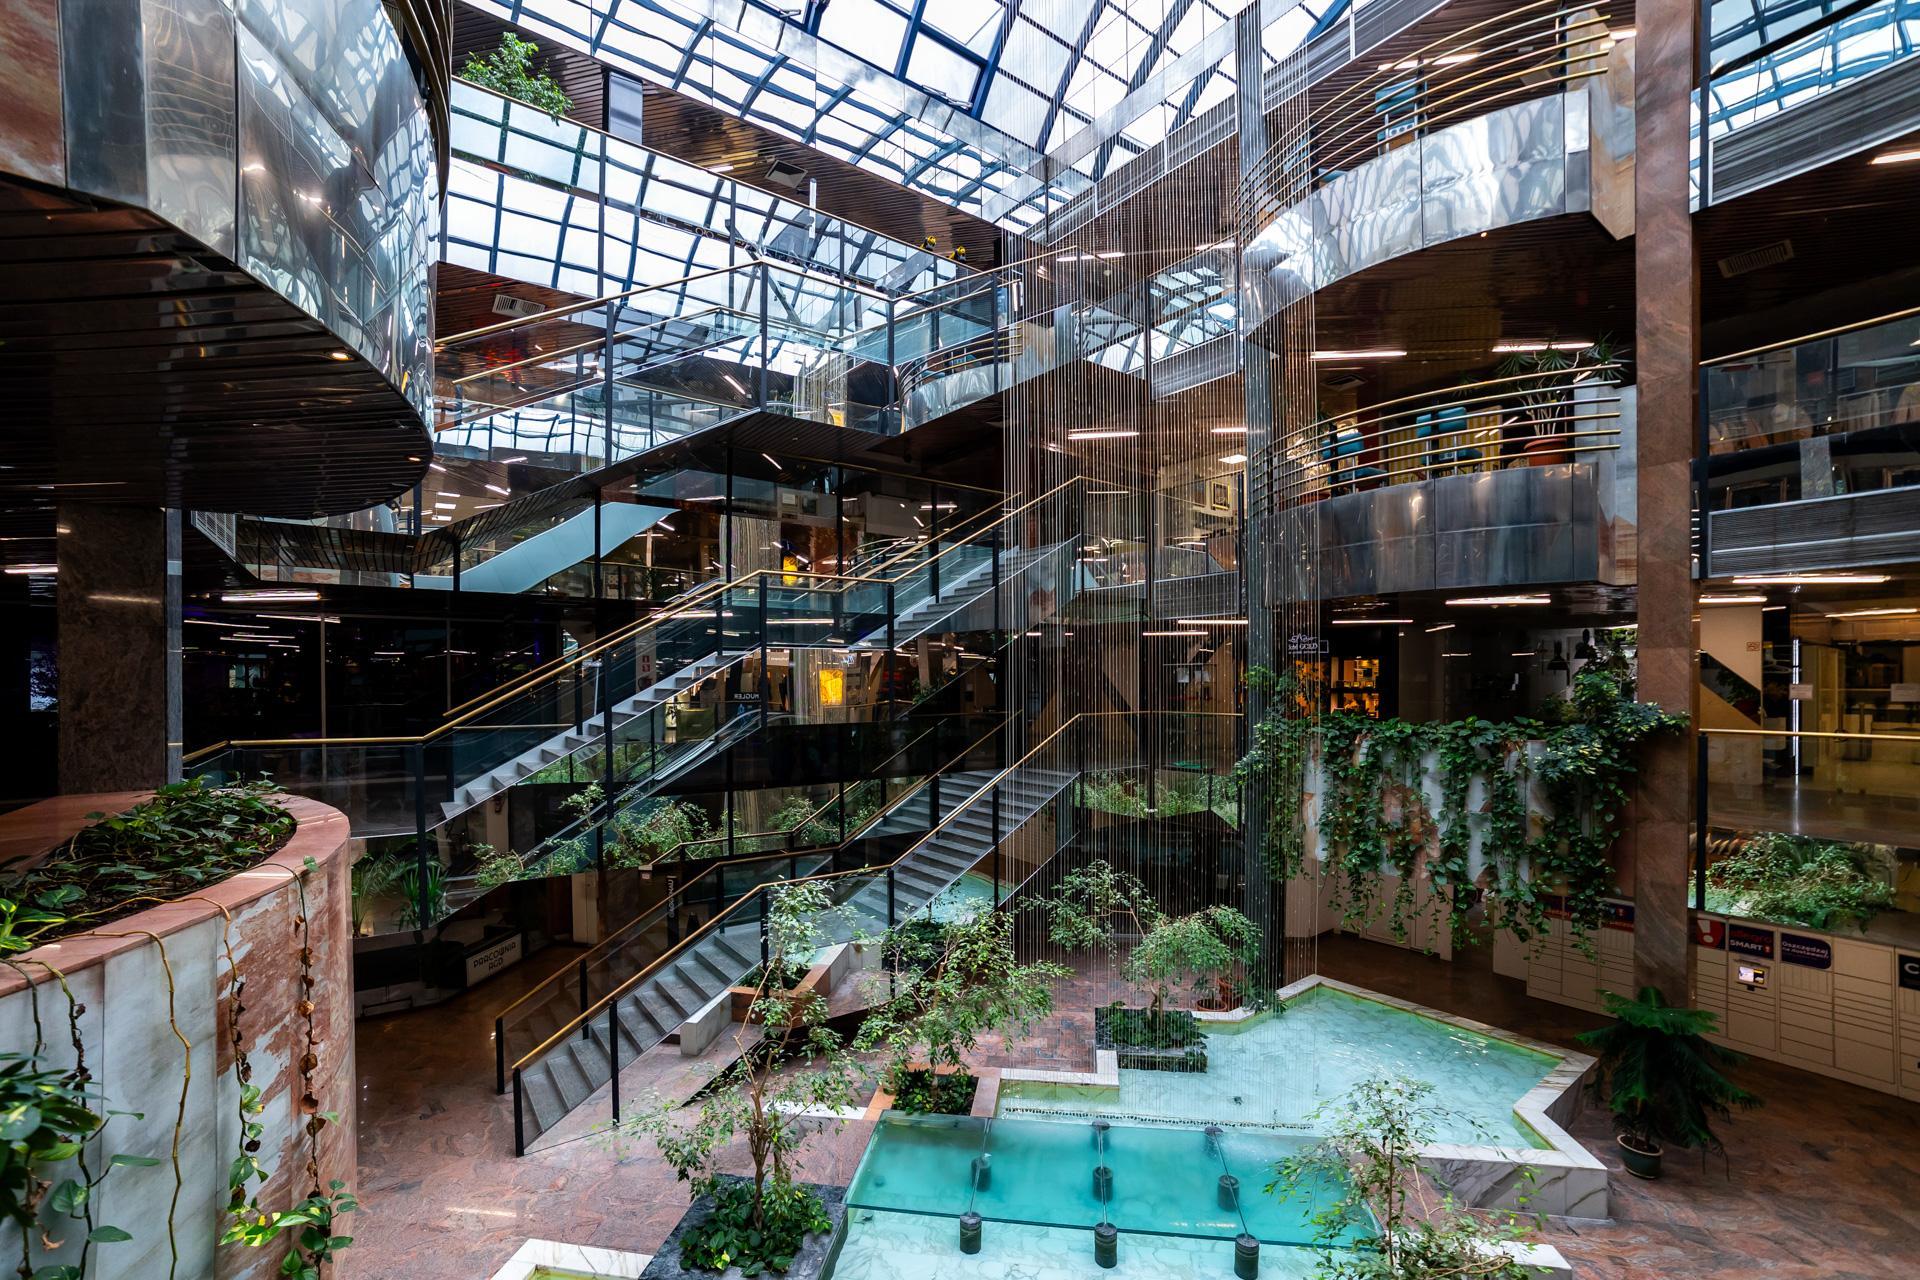 A symbol of luxury in the 90s, see the interior of Warsaw's first shopping mall